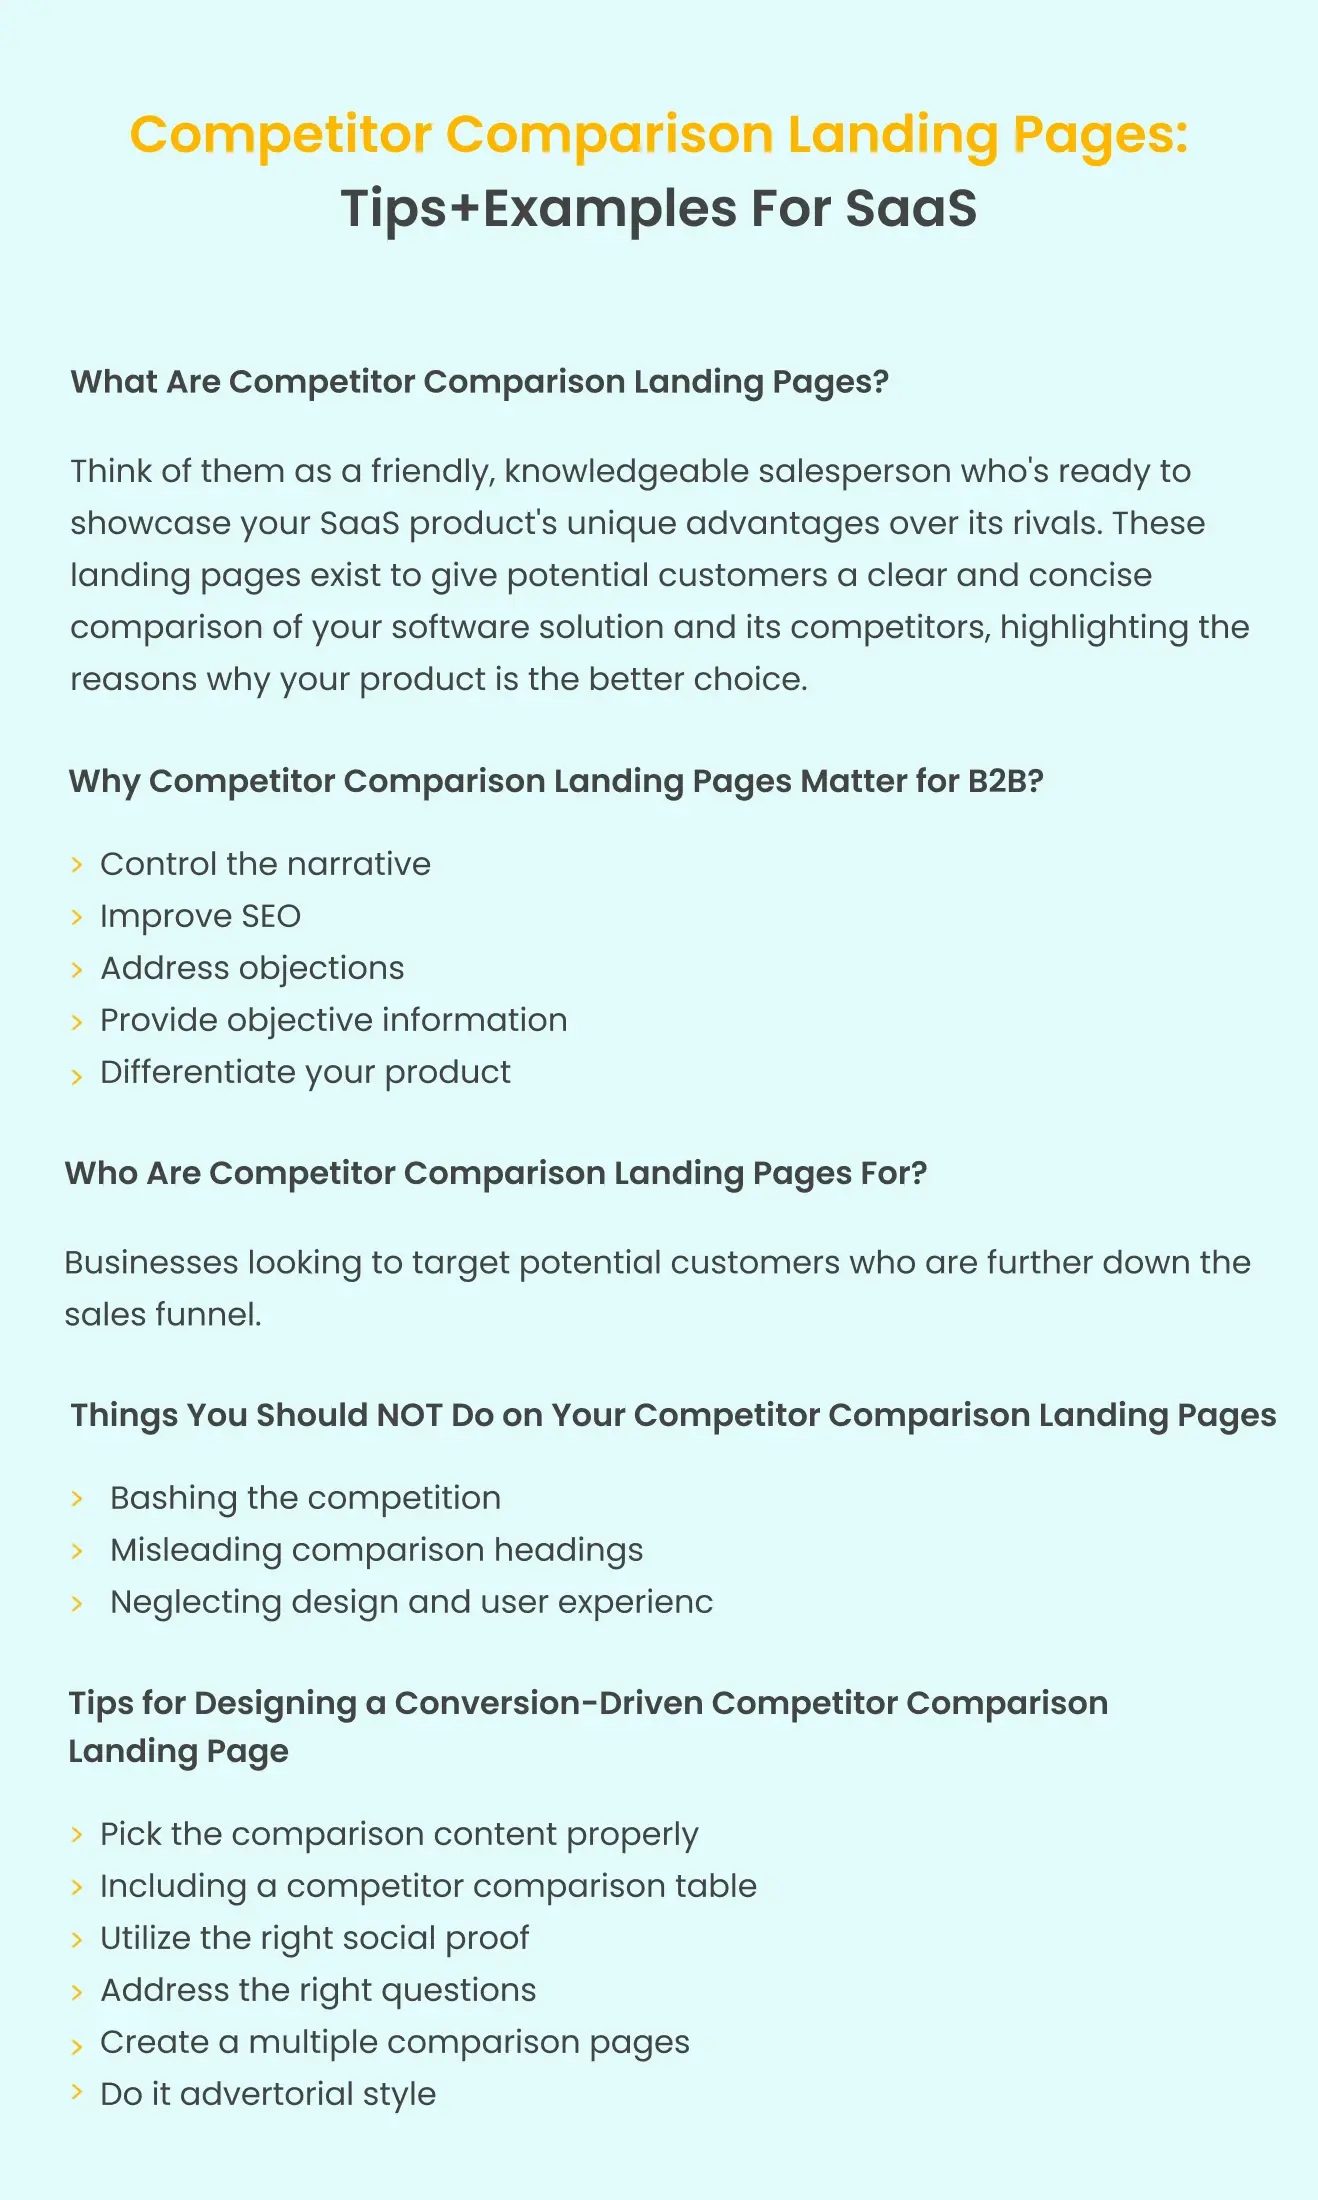 Competitor-Comparison-Landing-Pages-Tips-Examples-For-SaaS-Summary-55eb52.webp